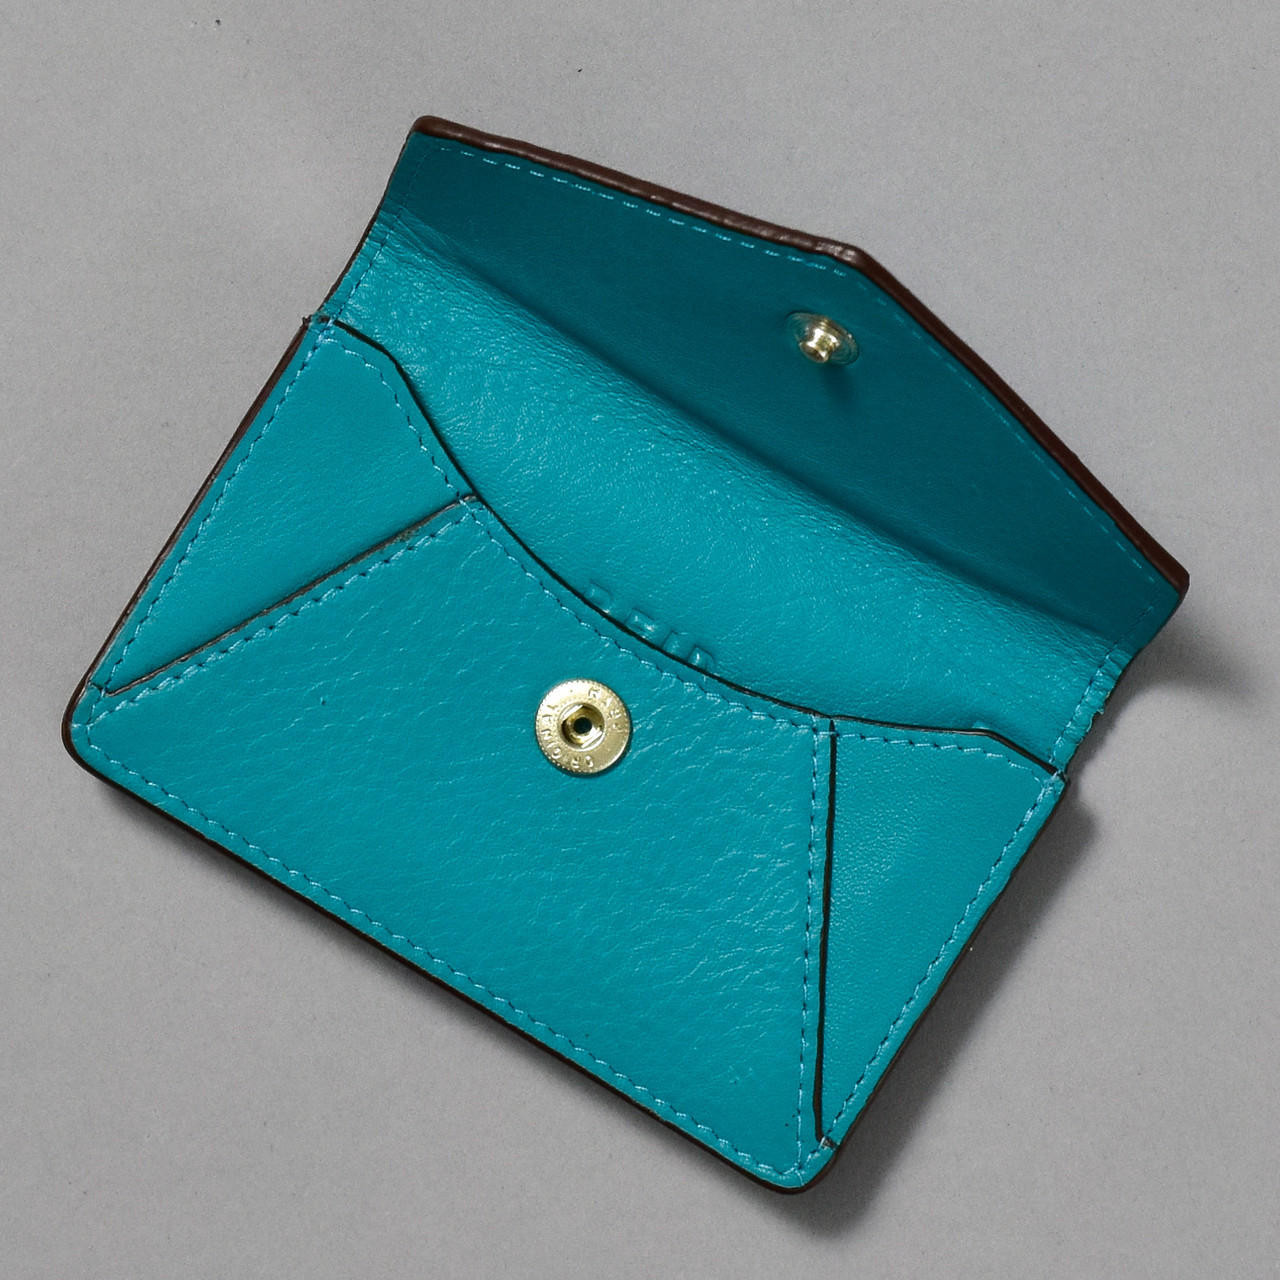 Teal-colored Men's Wallet with Coin Purse and Contrasting Interior